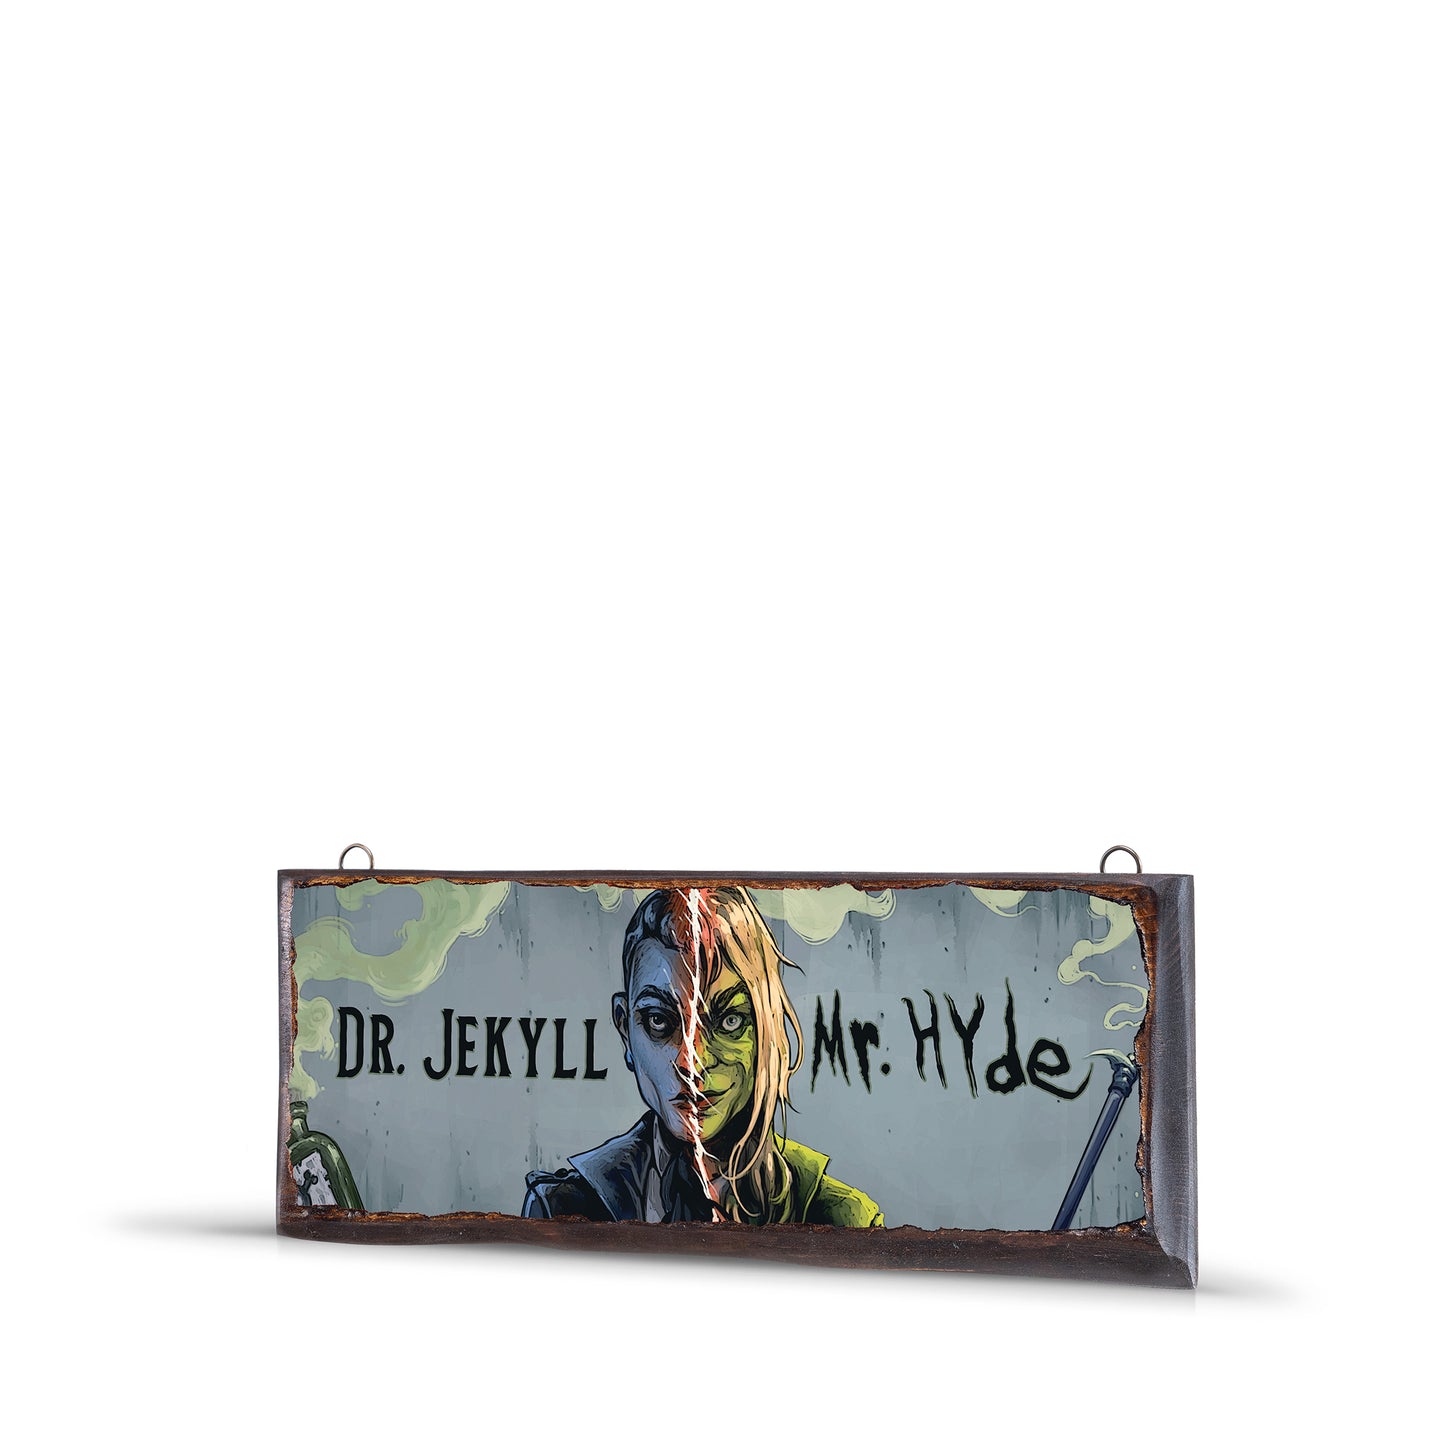 DR. JEKYLL AND MR. HYDE WOODEN SIGN - WS022